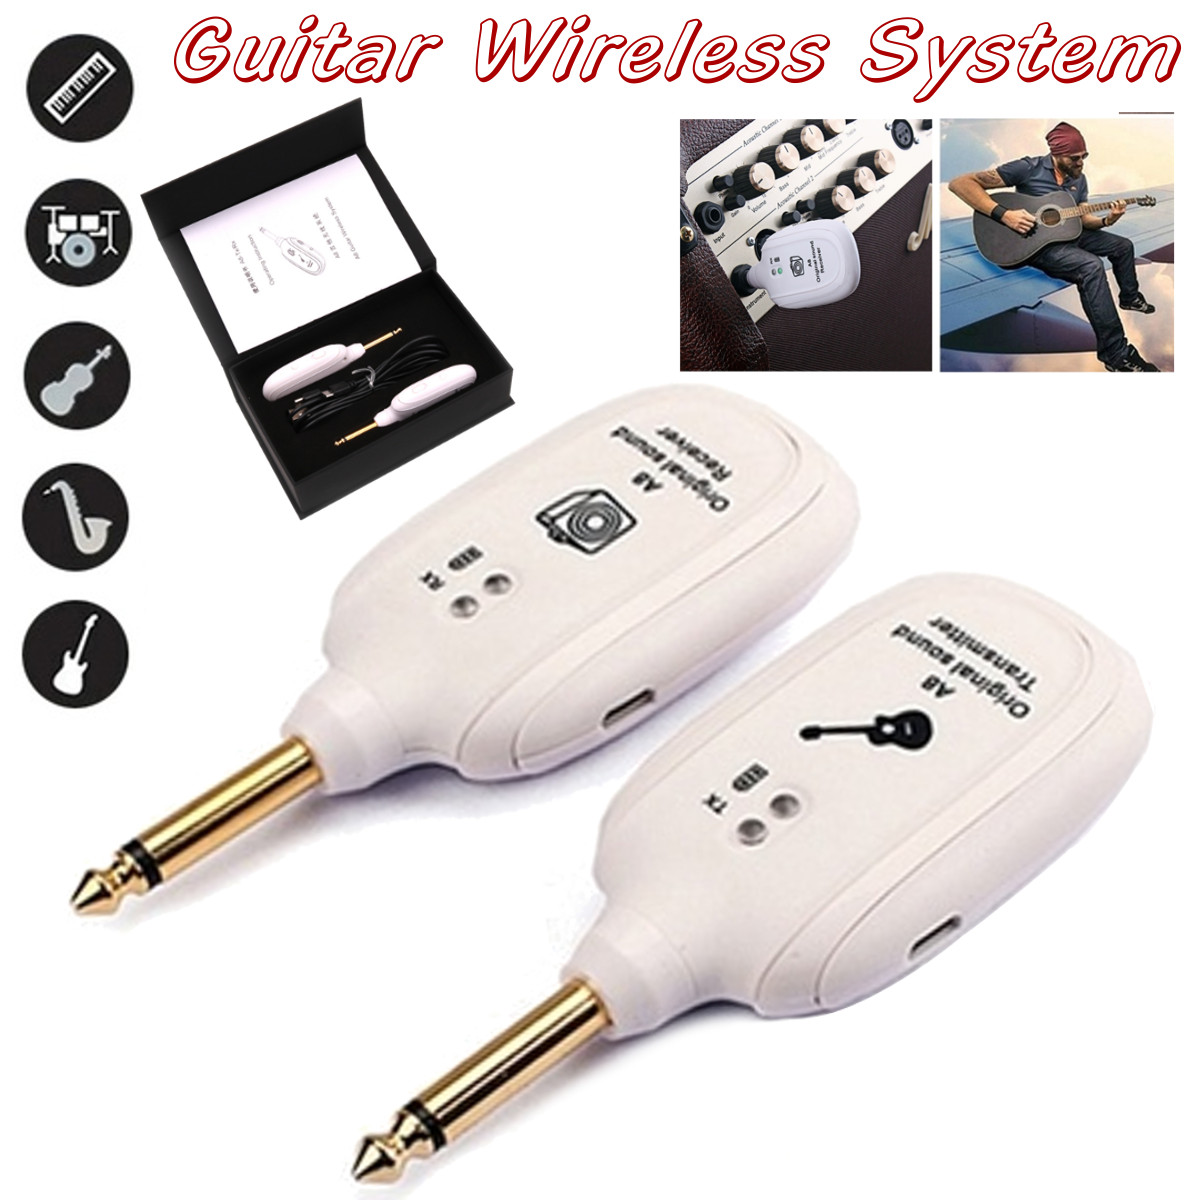 A8-TX/RX Wireless Audio Transmitter Receiver System for Electric Guitar Bass Violin